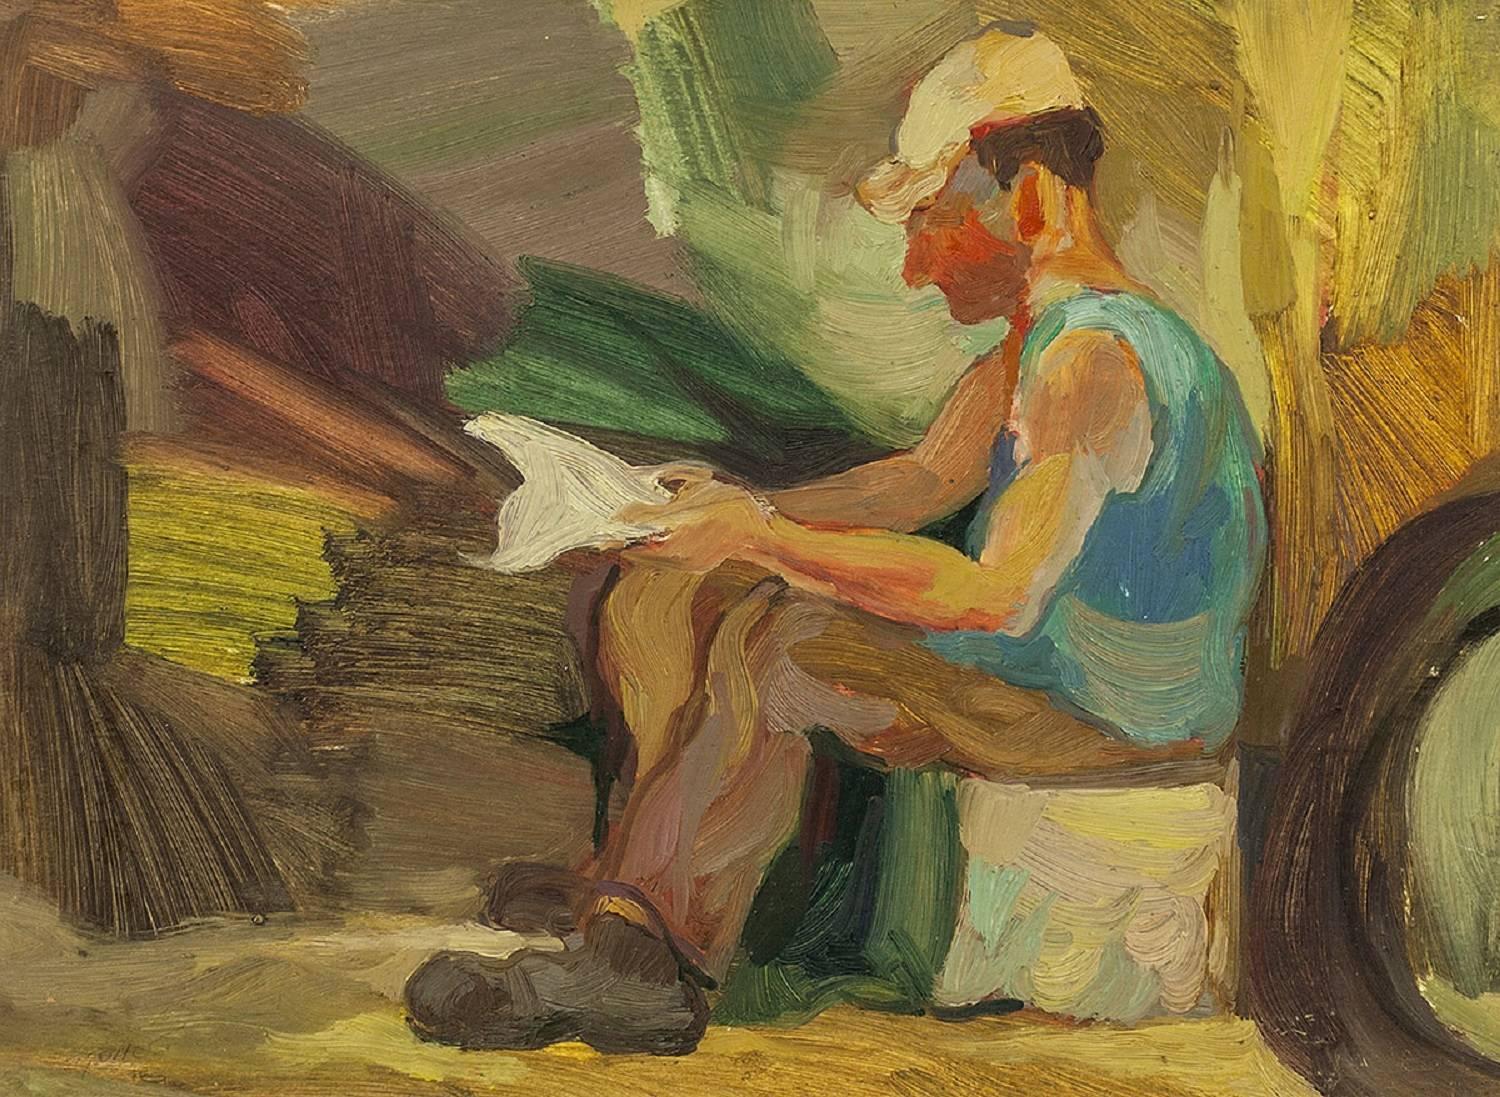 Murray S. Greenfield Art Gallery (label on verso).

Genre: Modern
Subject: People
Medium: Oil
Surface: Board
Country: Israel
Dimensions: 9 1/2